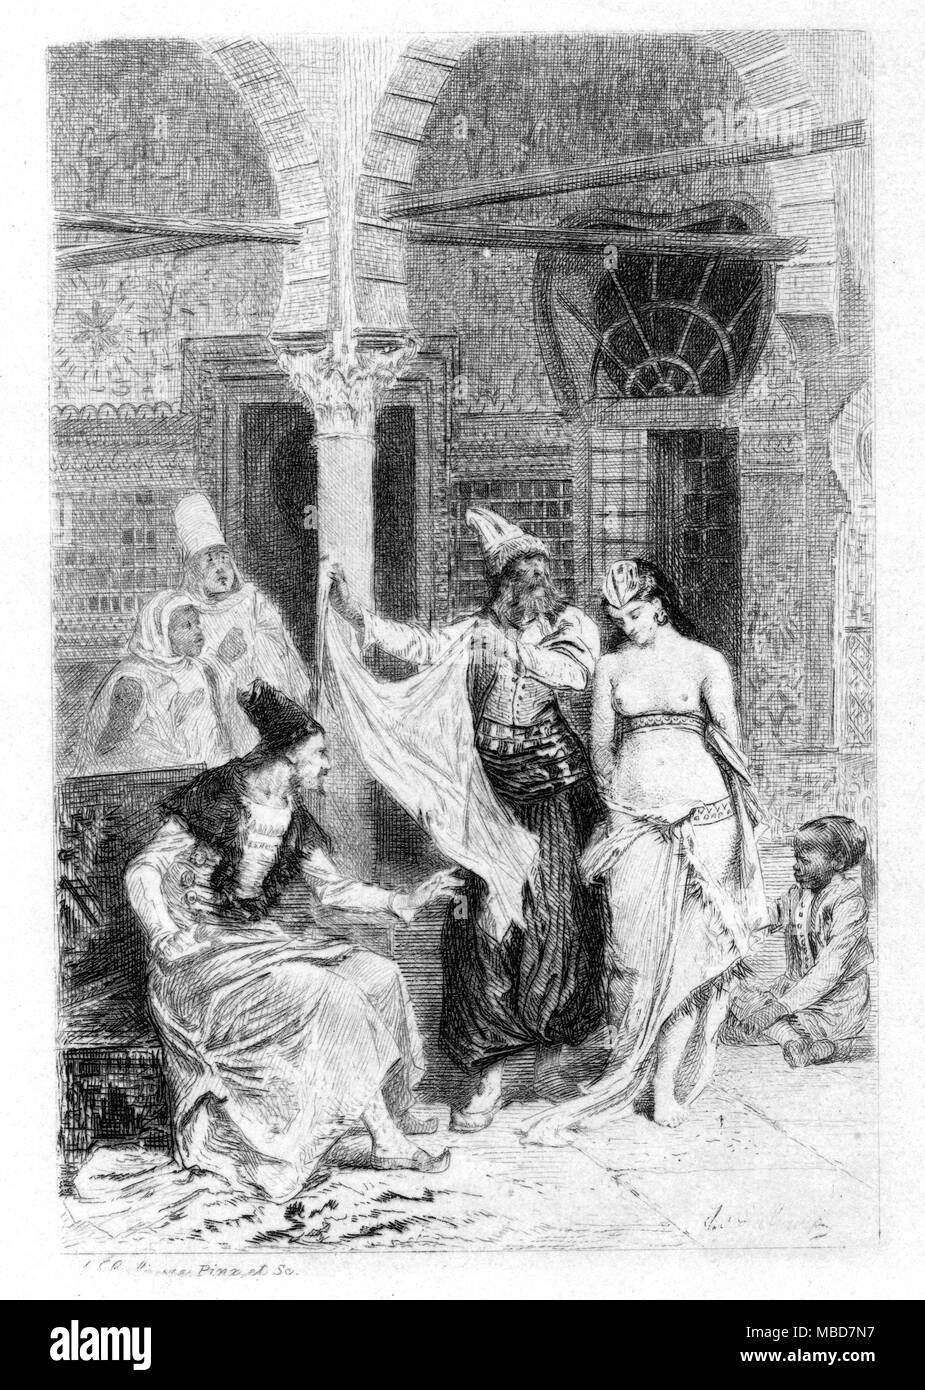 FAIRYTALES - SLAVE-GIRL The king Shehriman of Khorassan inspecting the slave-girl, 'fairer than any ever seen', offered for sale by a merchant. From the tale of Julnar of the Sea and her Son King Bedr Basim of Persia. Etching from the John Payne translation of the Arabic of The Book of the Thousand Nights and One Night, 1901, Vol. 7. Stock Photo